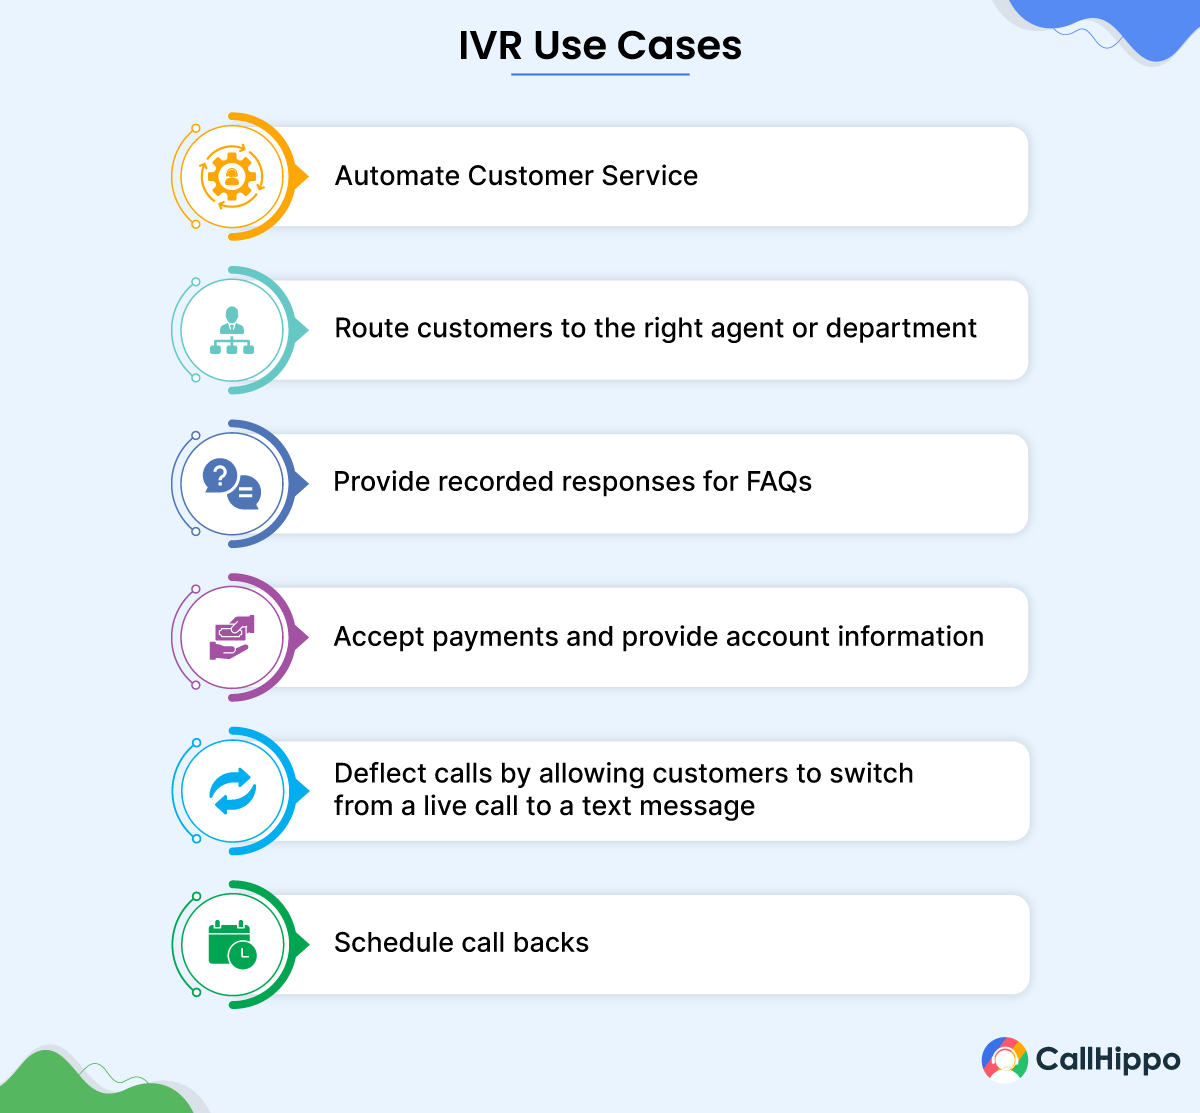 When to use IVR